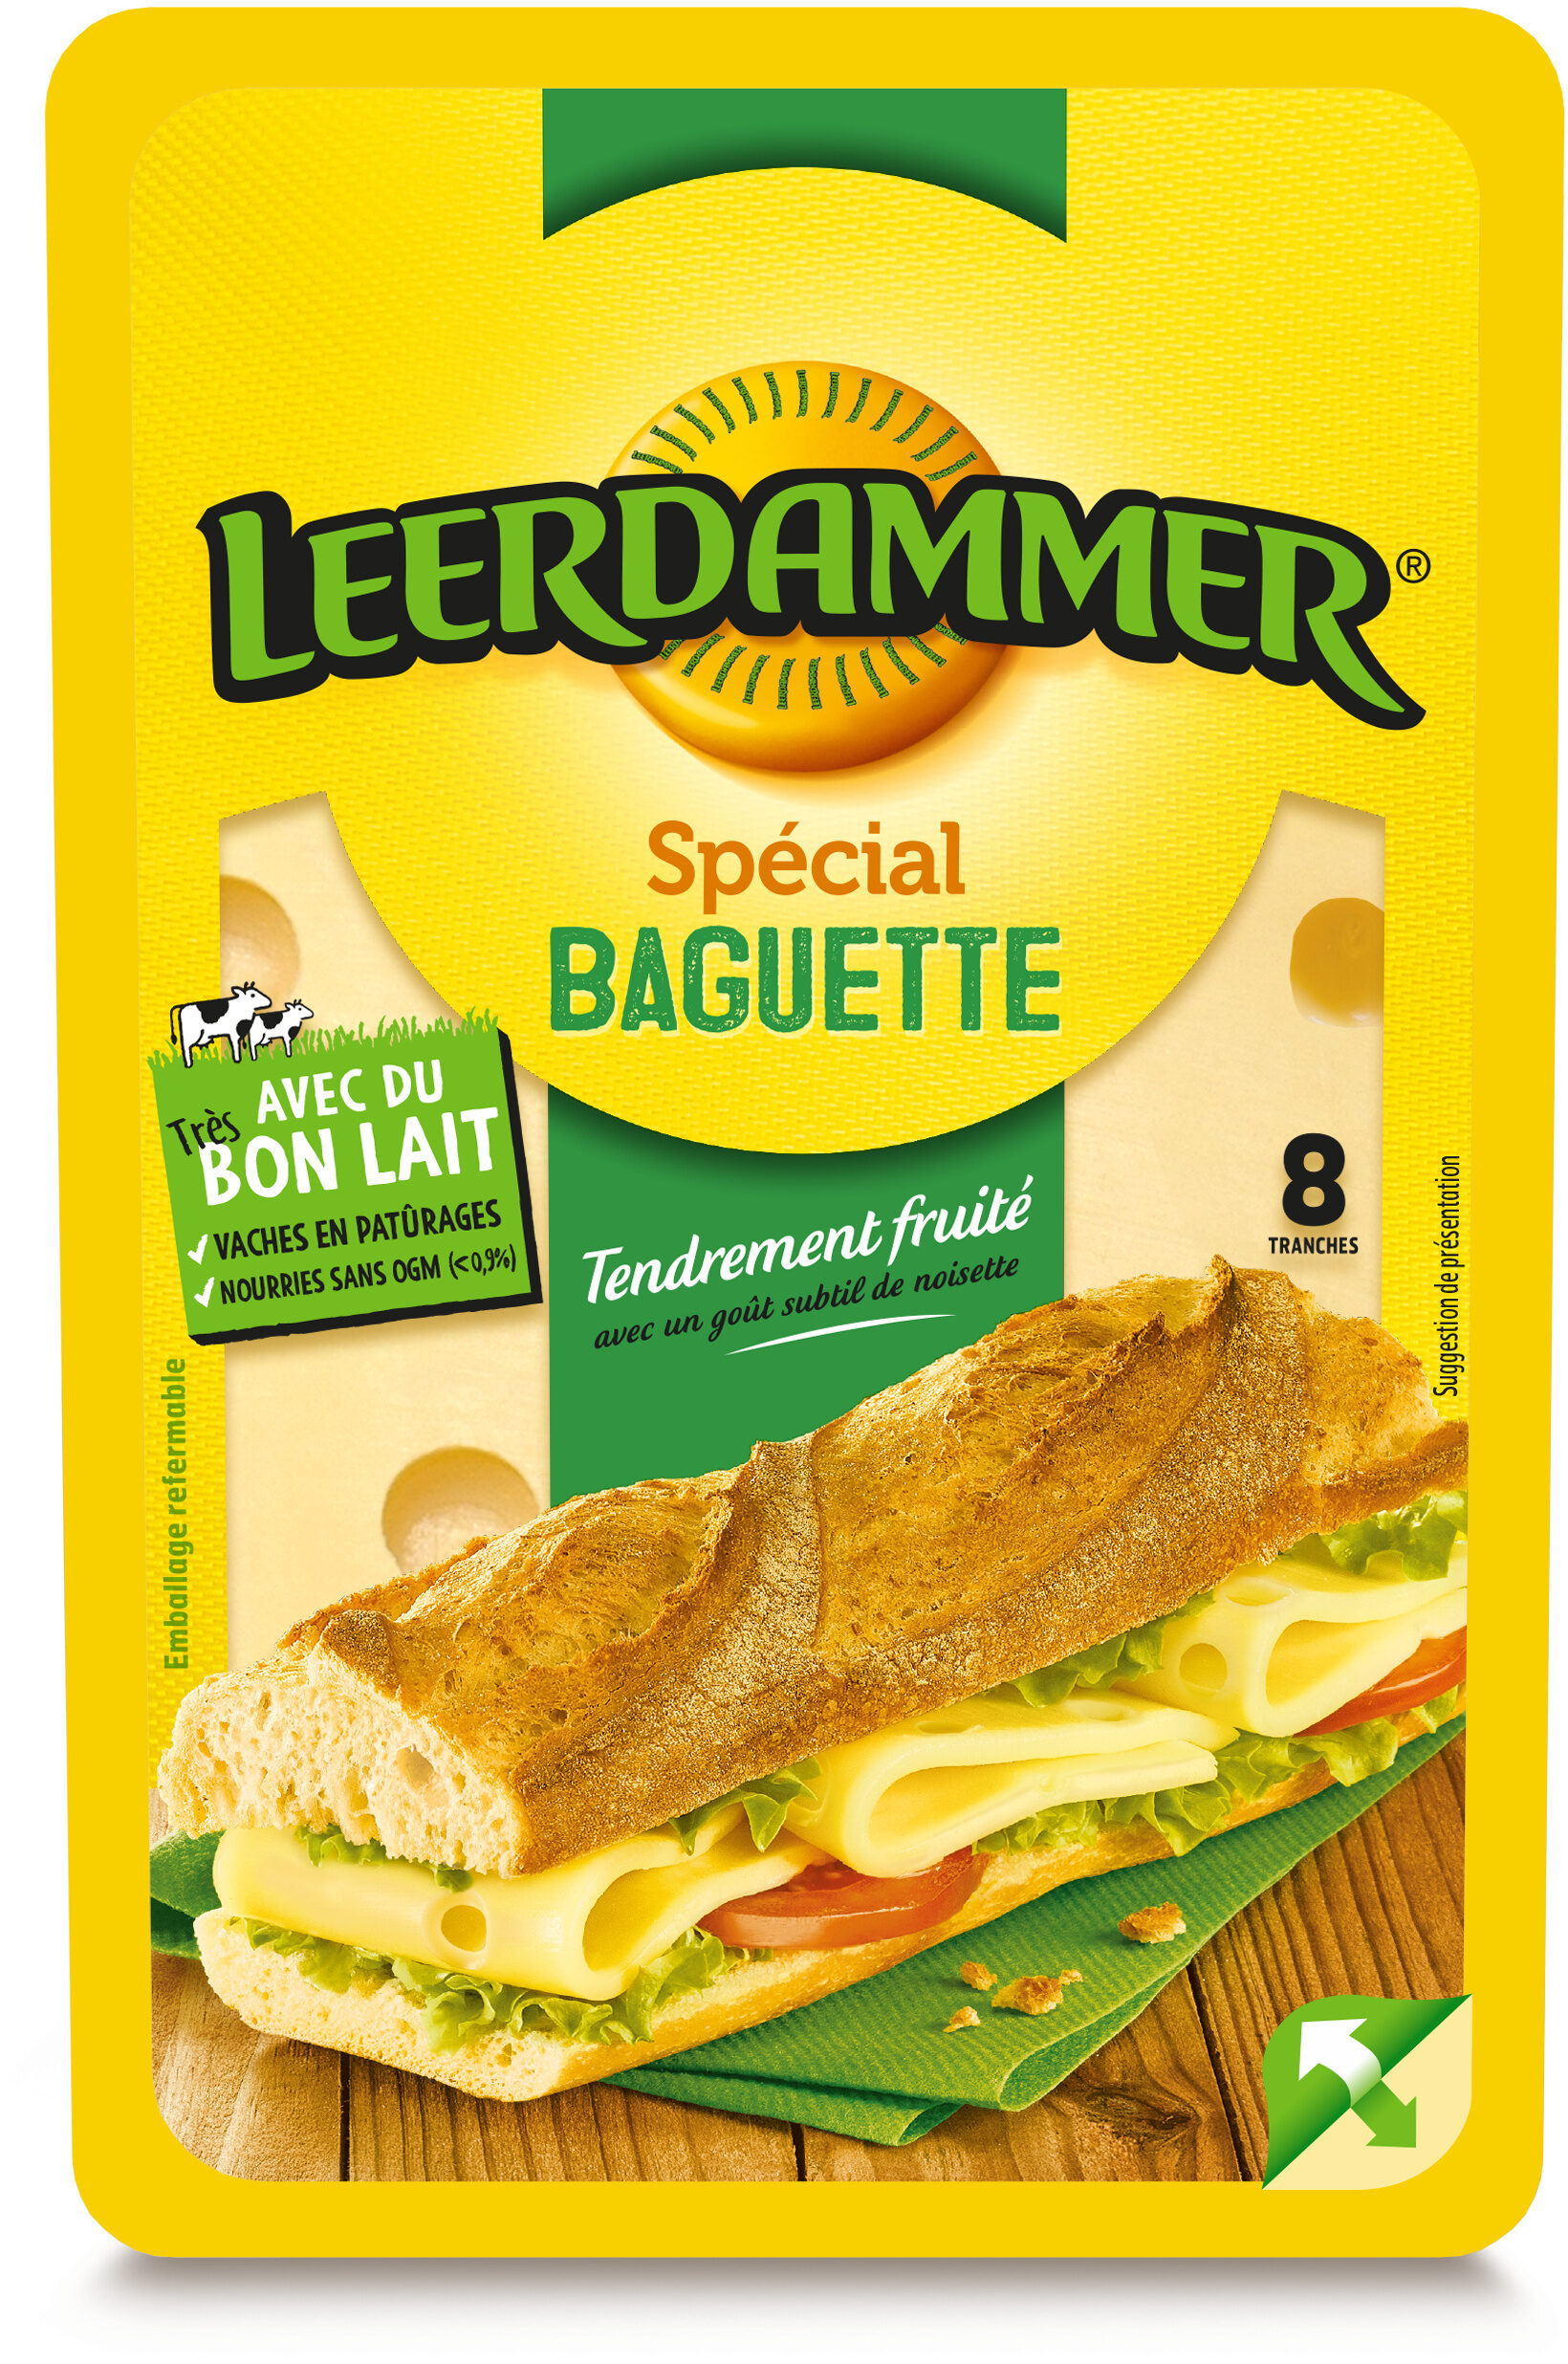 Leerdammer Baguette 8 tranches - Product - fr